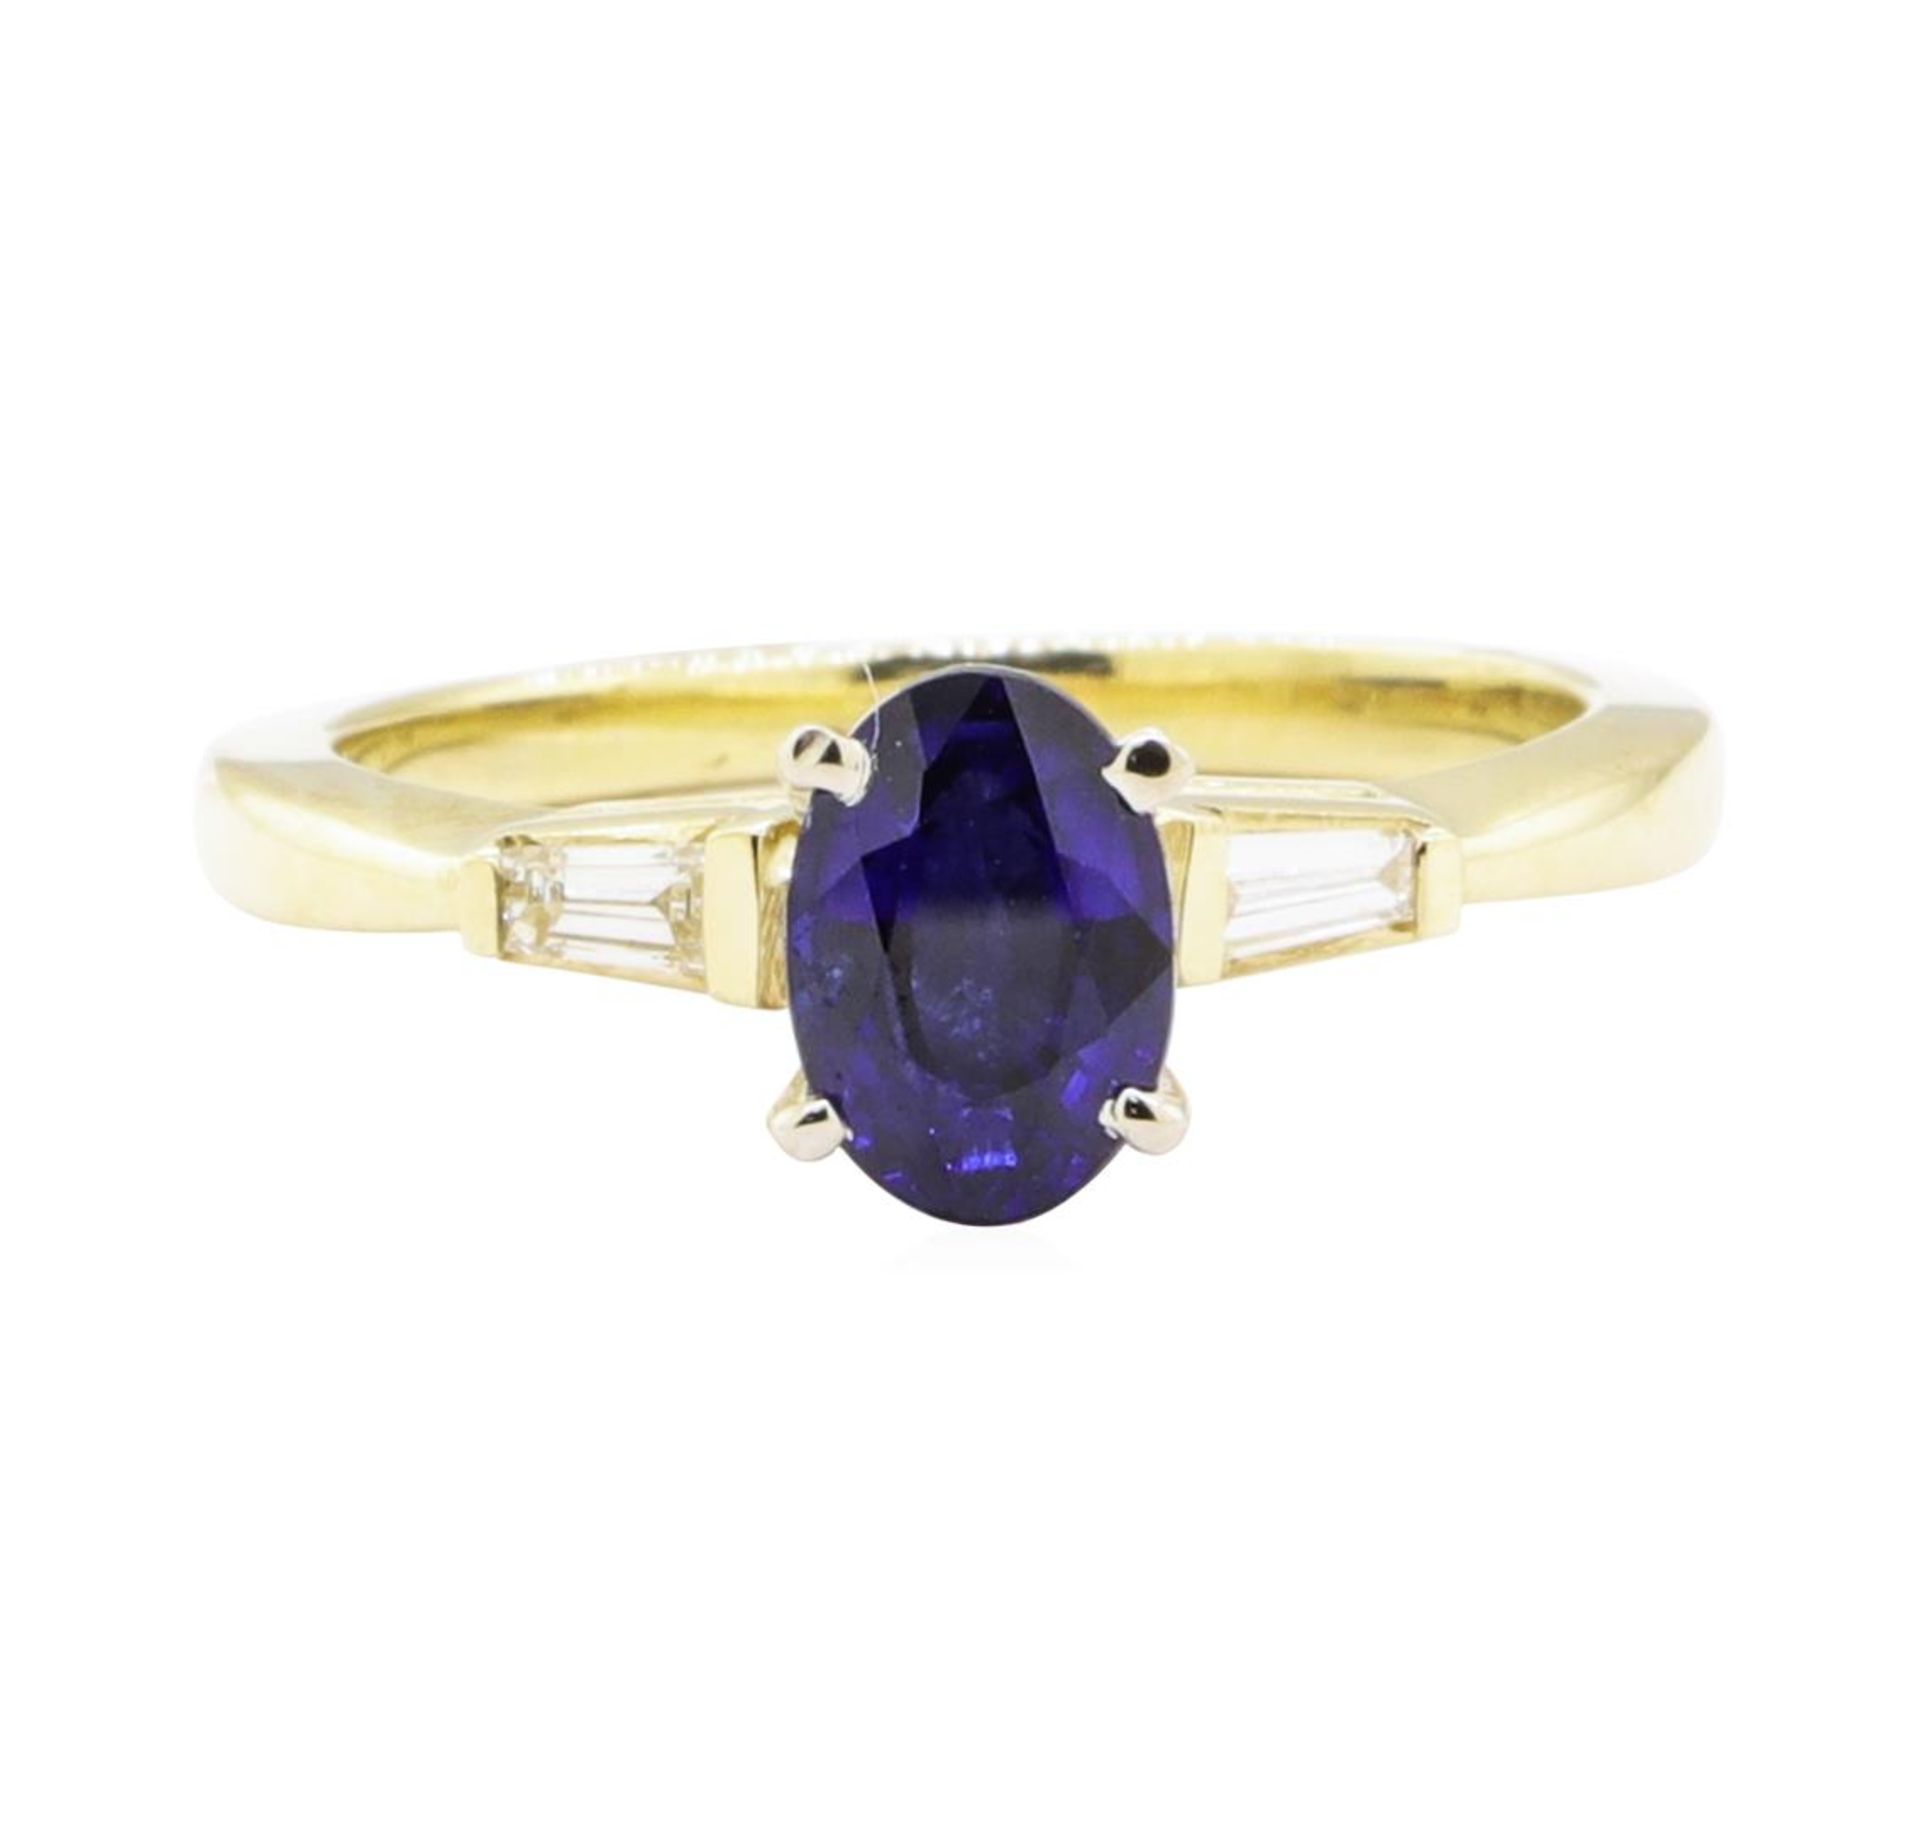 1.22 ctw Sapphire and Diamond Ring - 14KT Yellow Gold - Image 2 of 4